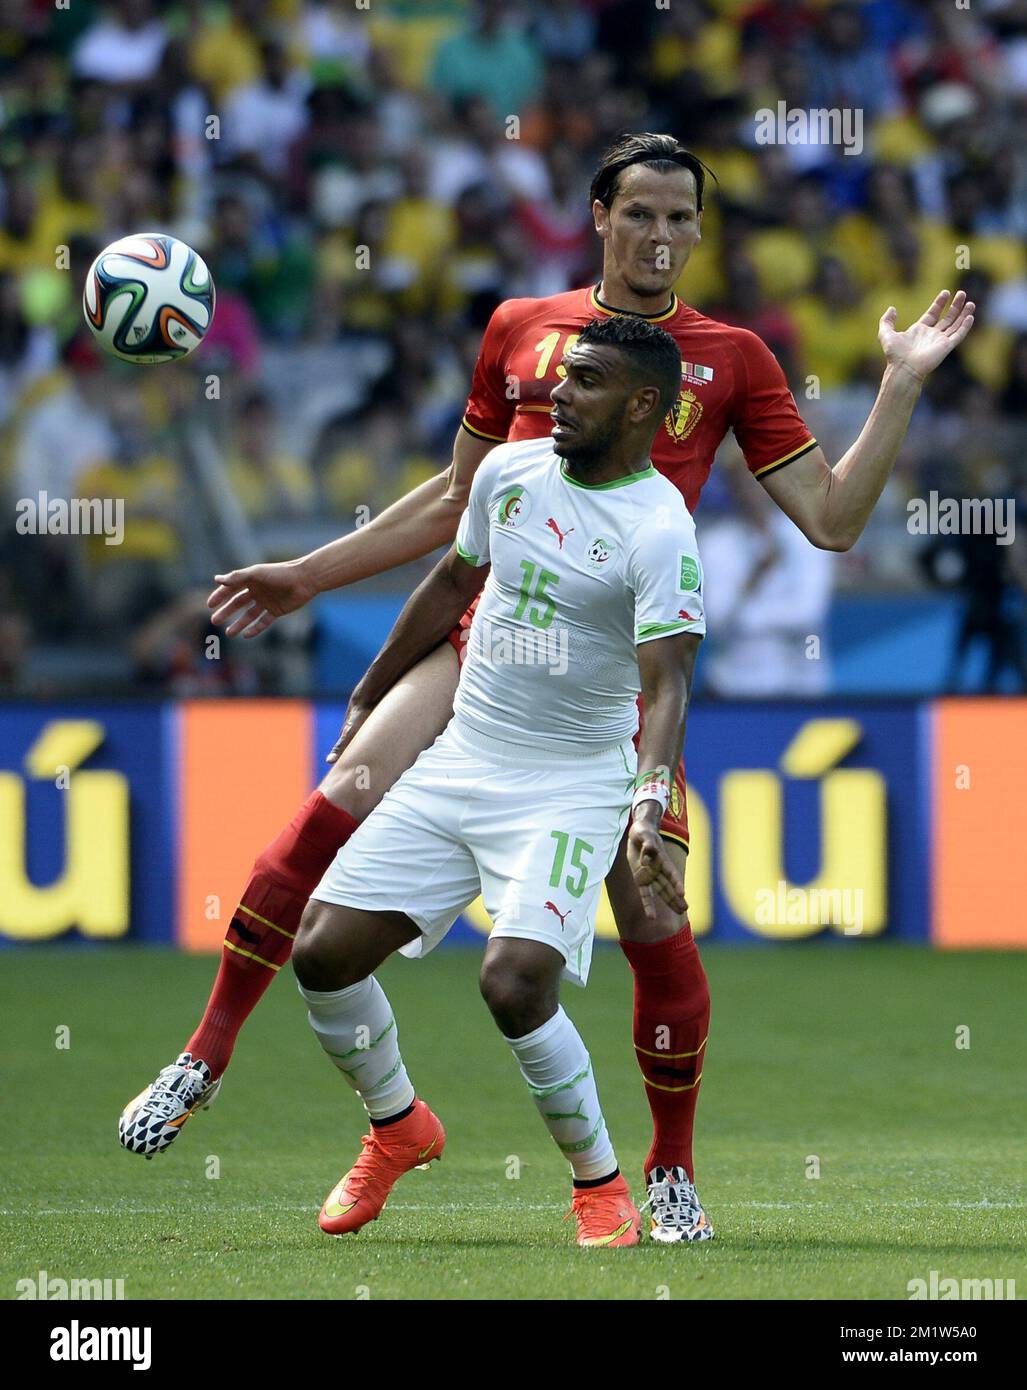 Belgium's Daniel Van Buyten and Algeria's El Arbi Hillel Soudani fight for the ball a soccer game between Belgian national team The Red Devils and Algeria in Belo Horizonte, Brazil, the first game in Group H of the first round of the 2014 FIFA World Cup, Tuesday 17 June 2014.  Stock Photo